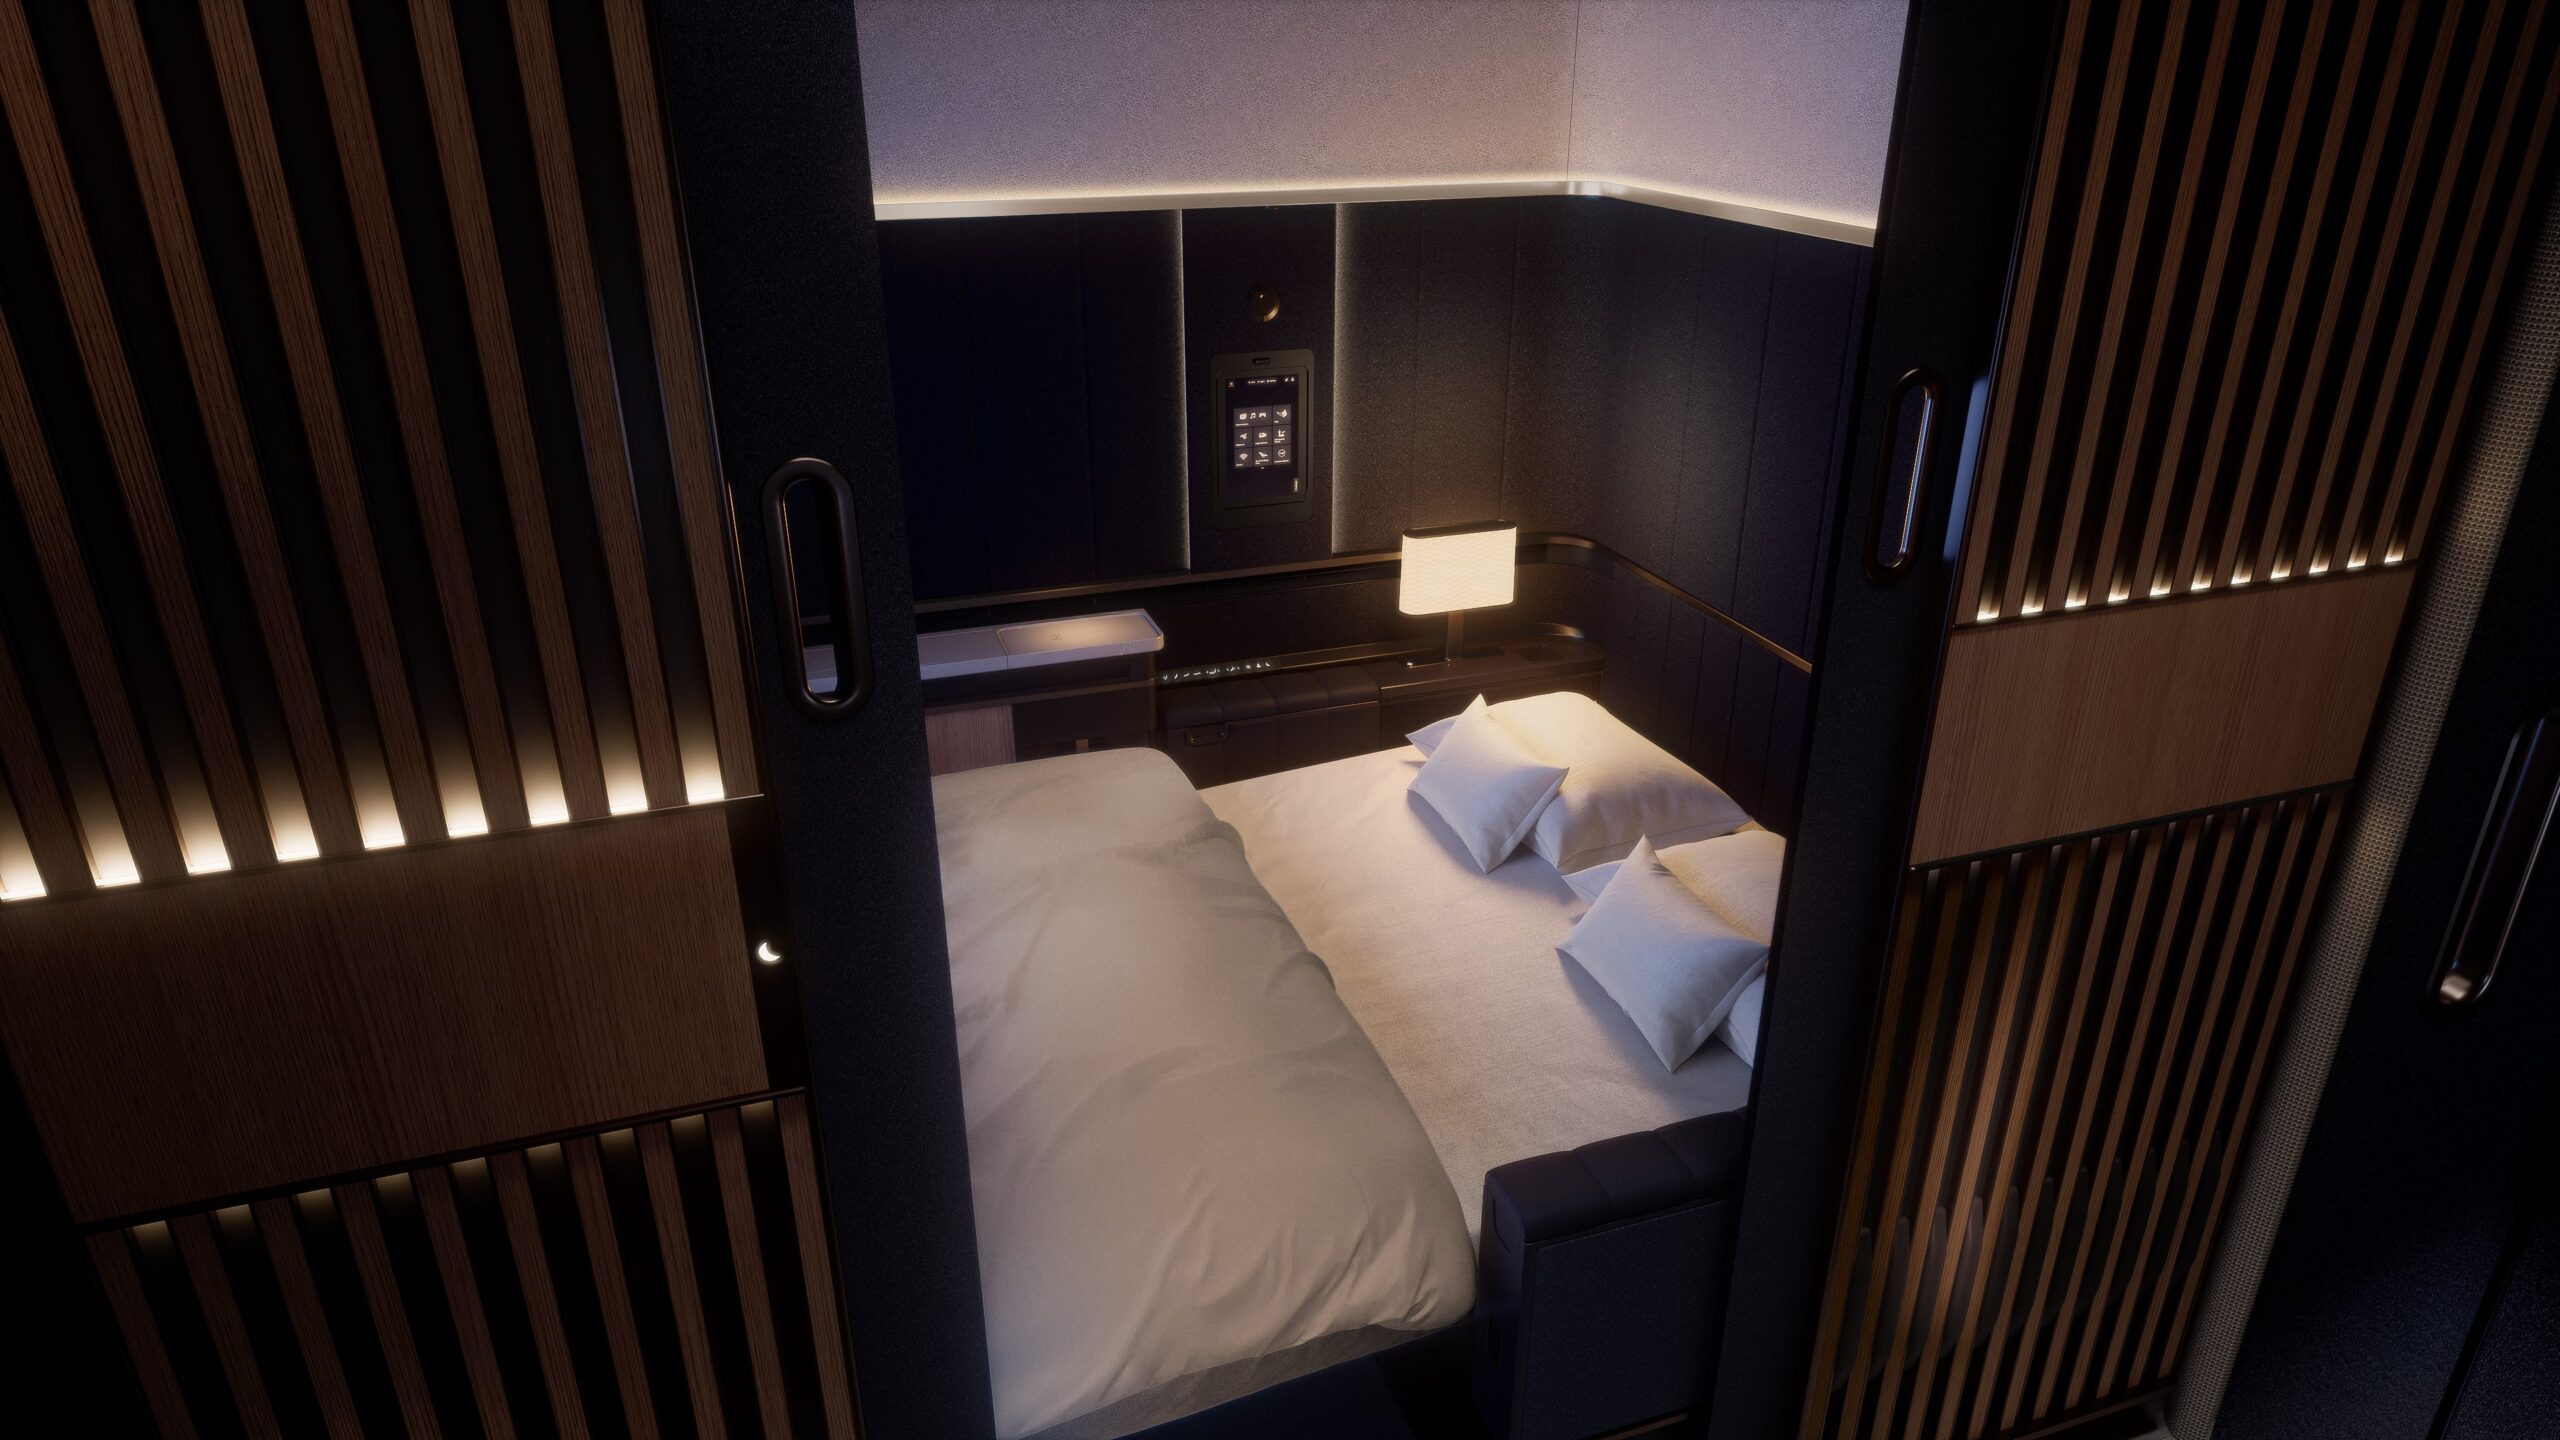 Lufthansa new Allegris first-class suites: Interior photo showing a double bed